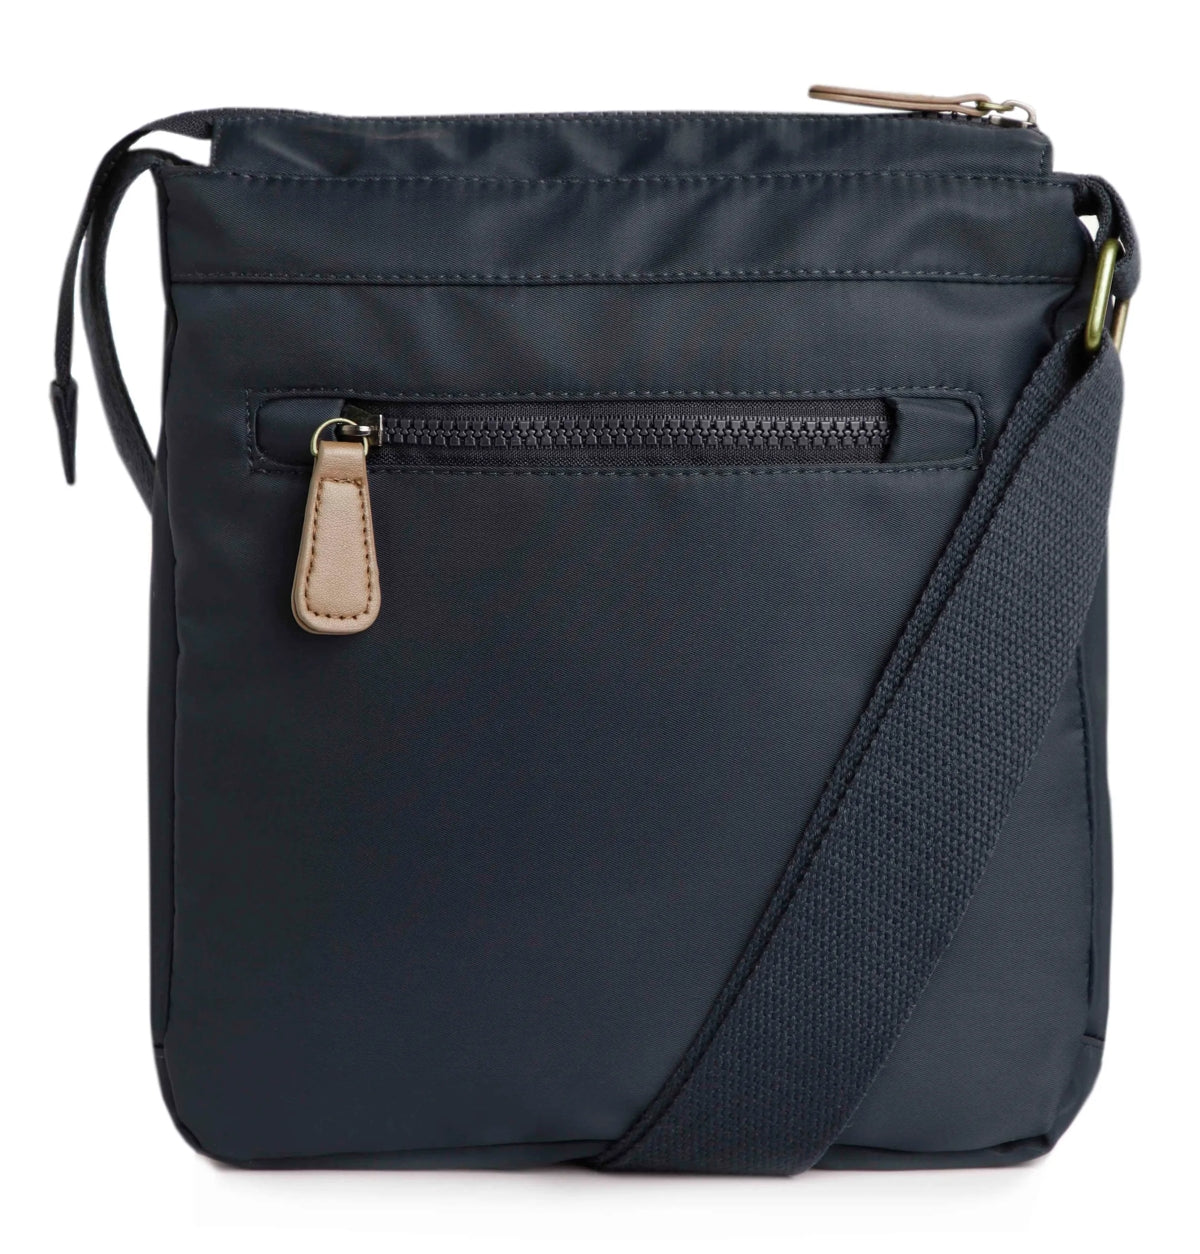 Small navy cross body Arman bag from Weird Fish with back zip pocket.